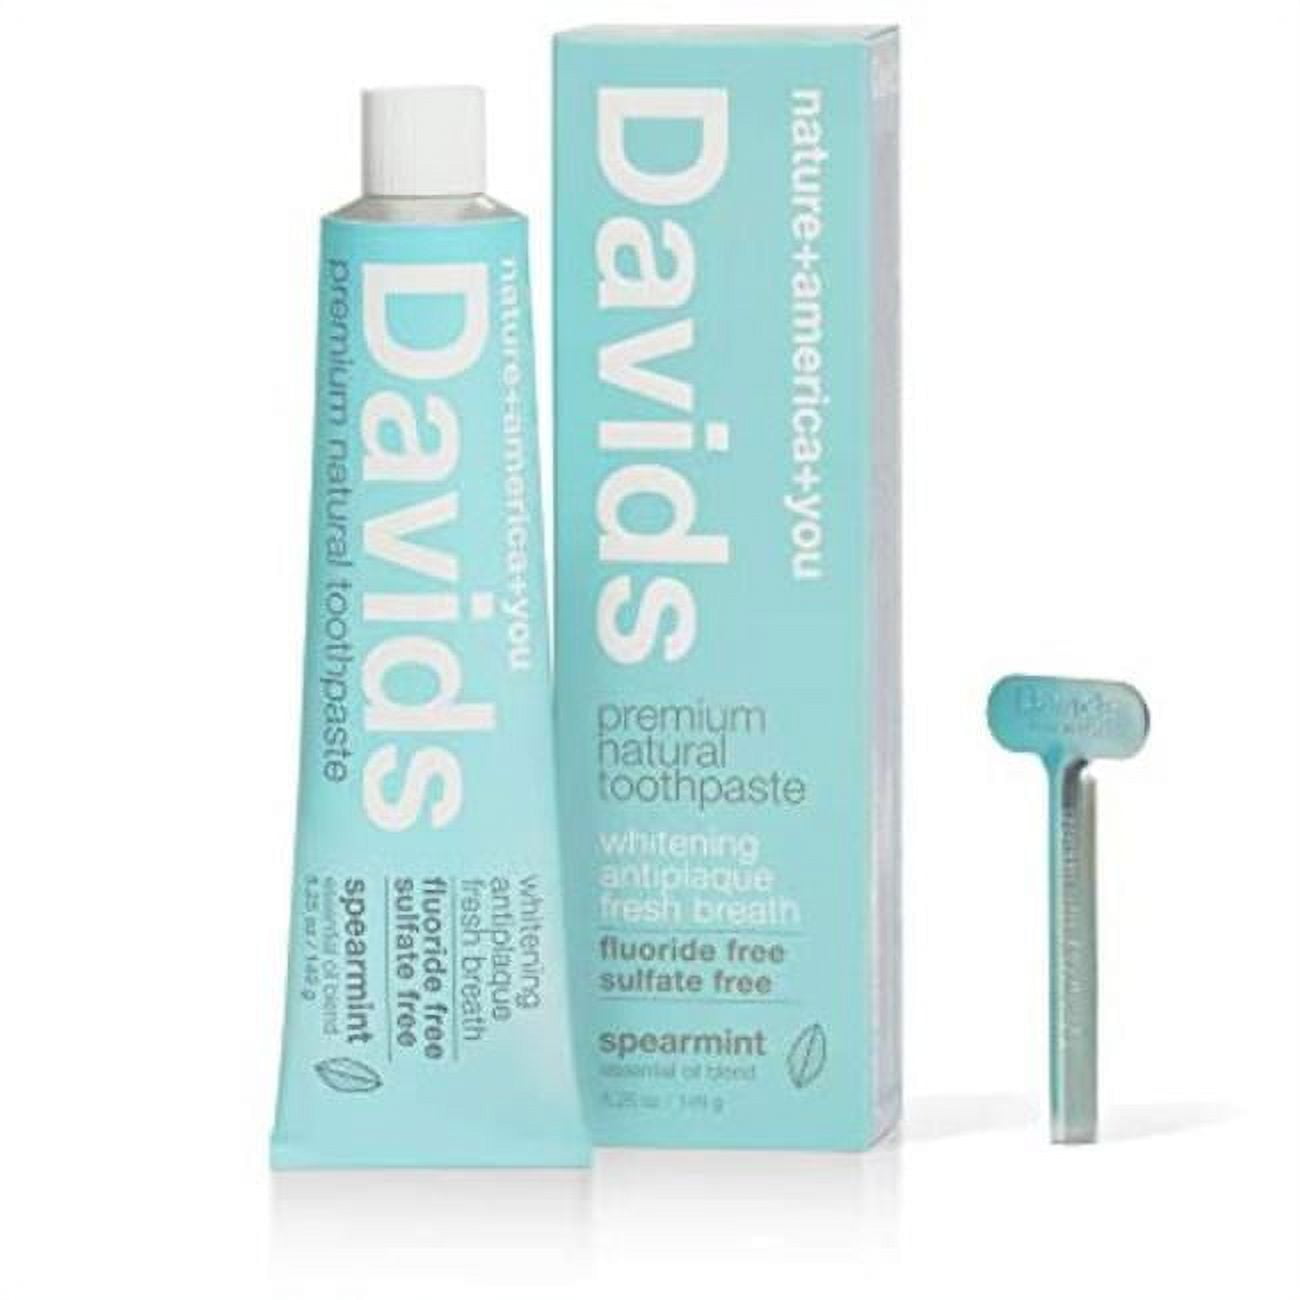 Picture of Davids 40200 5.25 oz Spearmint Antiplaque Natural Whitening Toothpaste